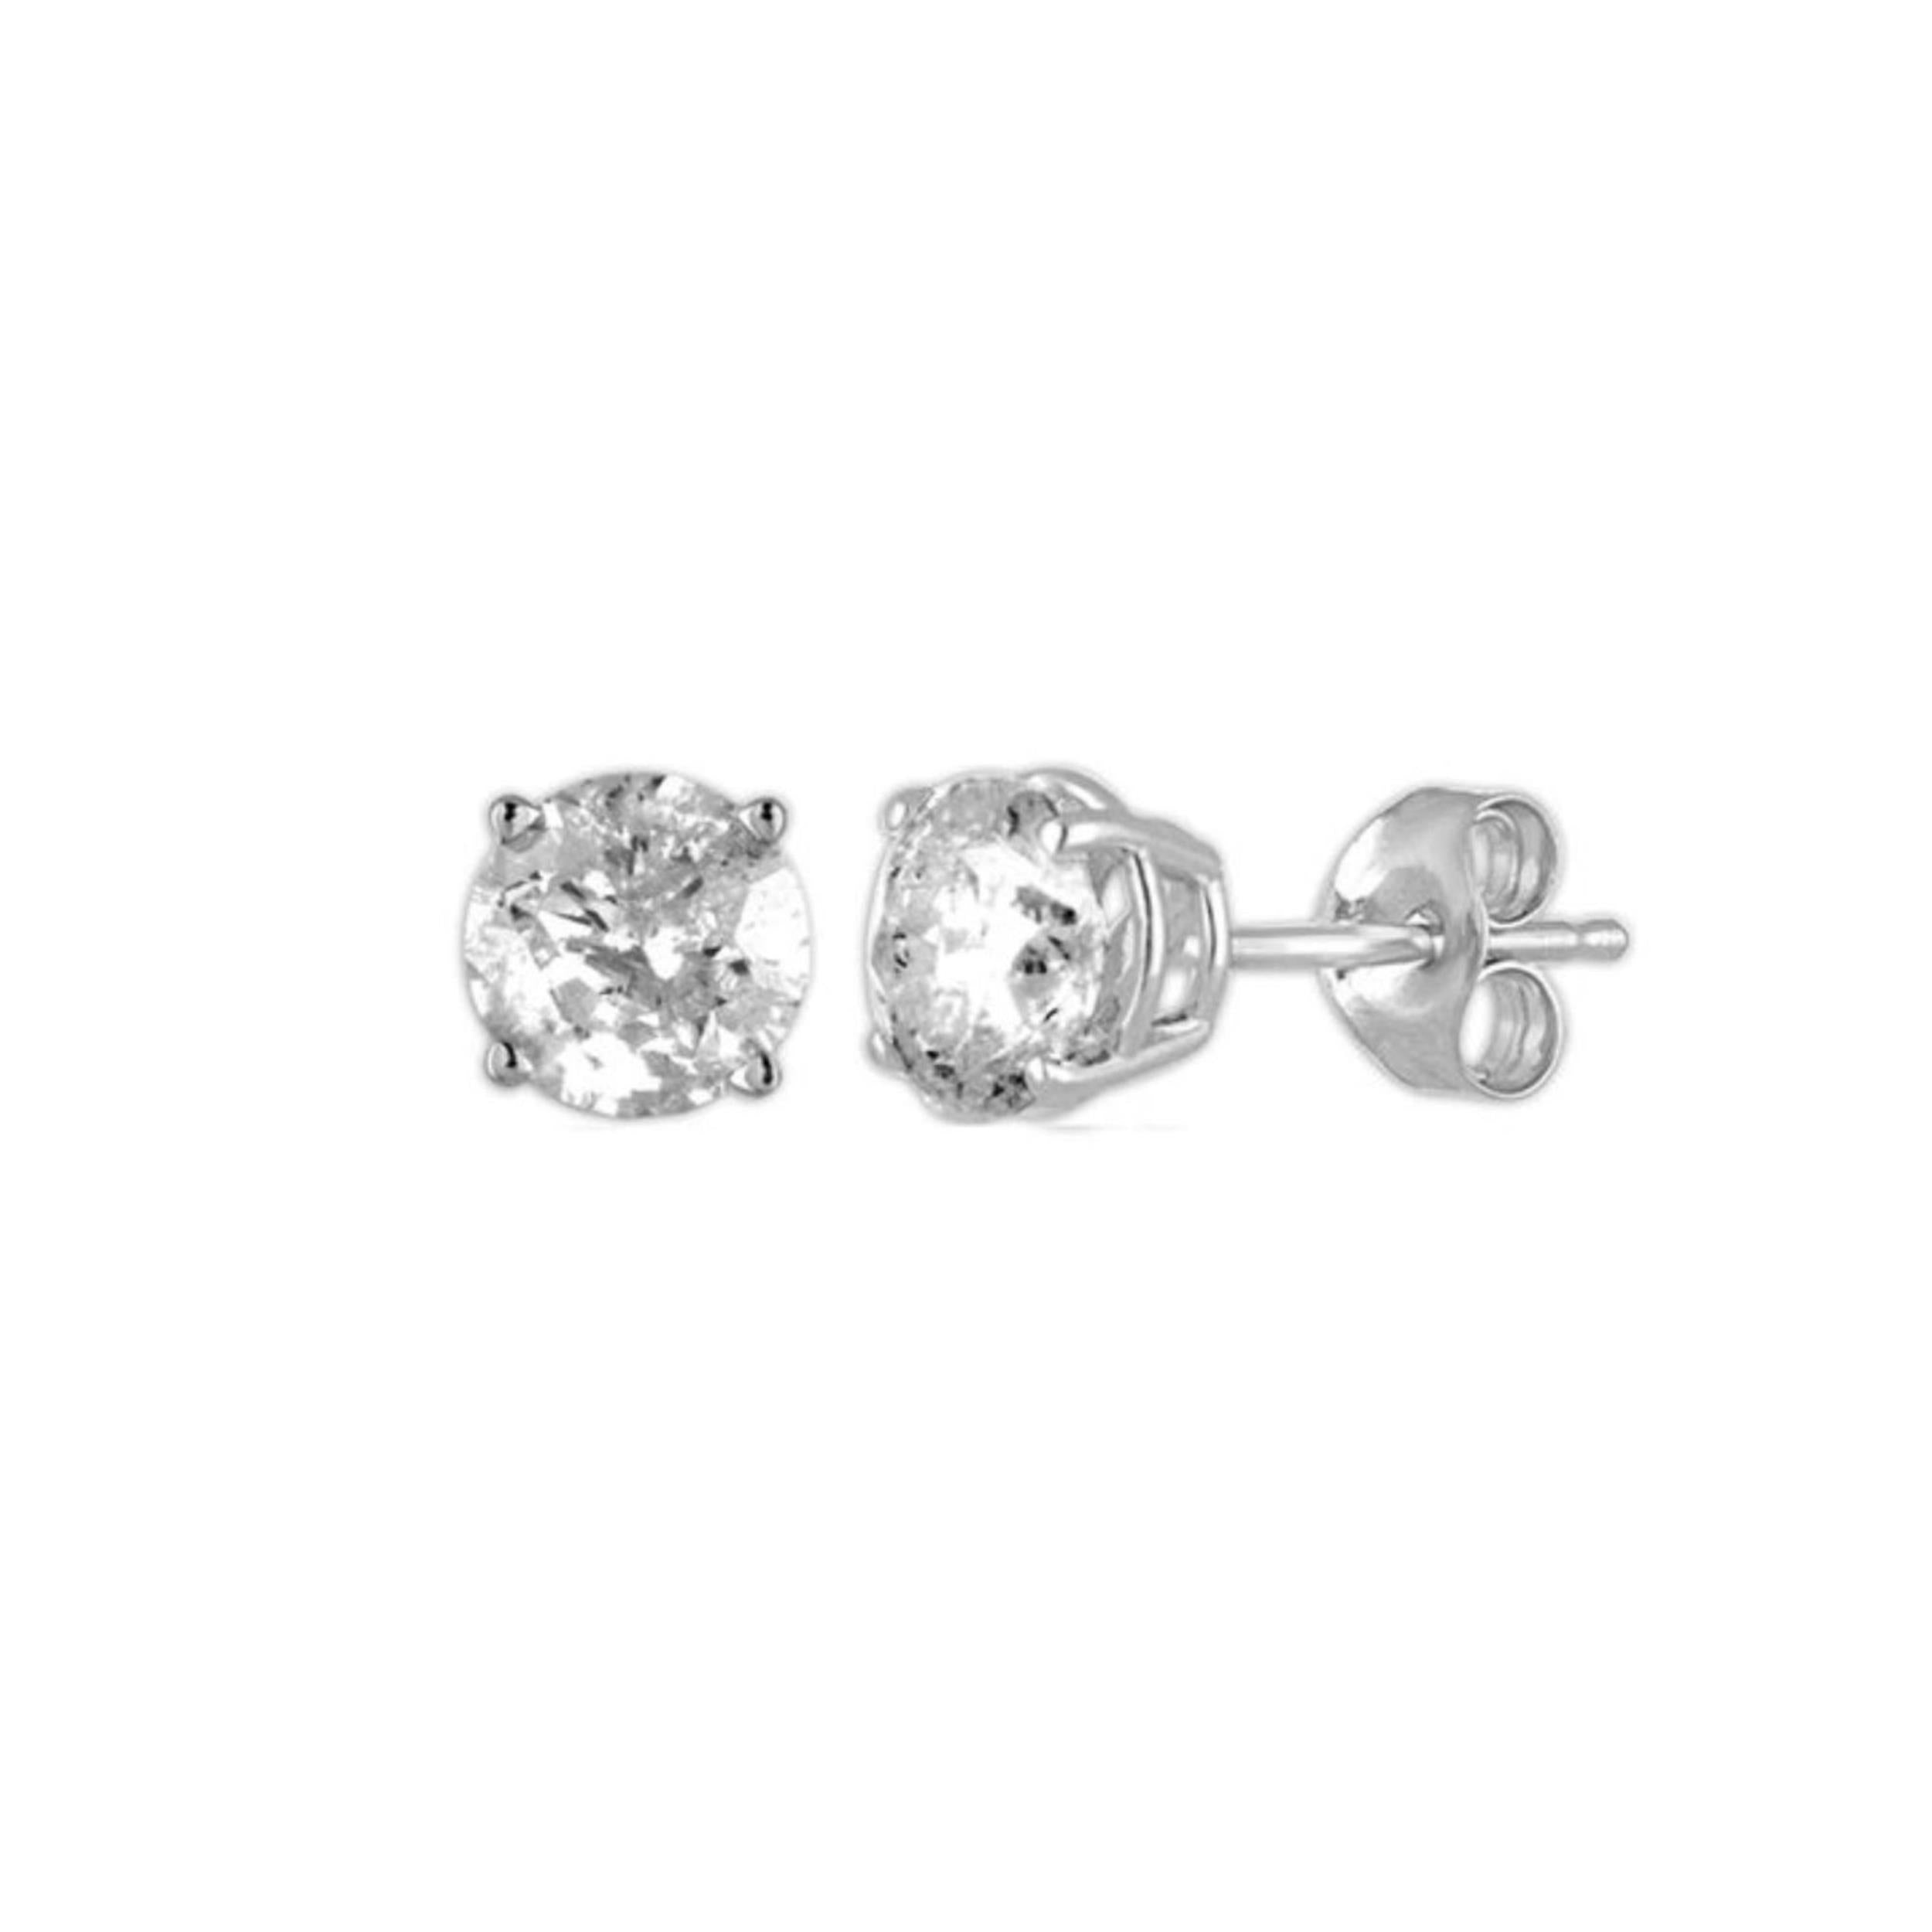 14Kt White Gold 0.40 Ct Genuine Natural Diamond Round Stud Earrings